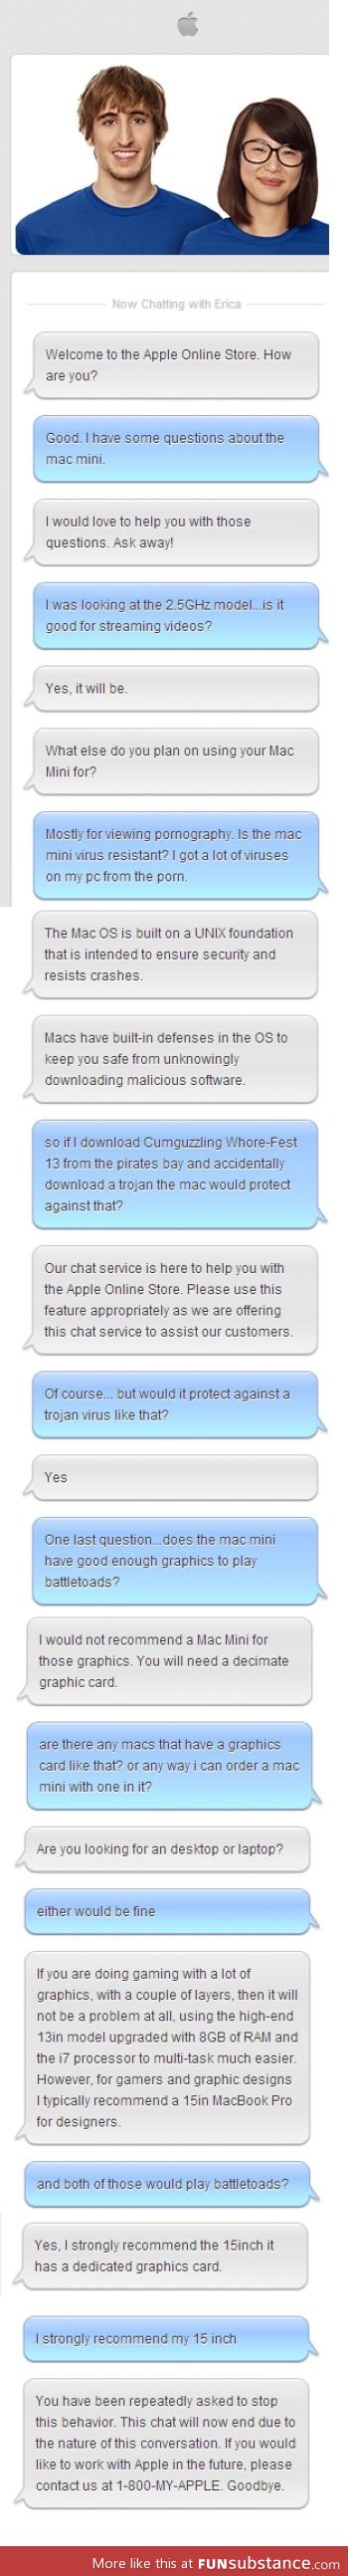 Messing with Apple customer service